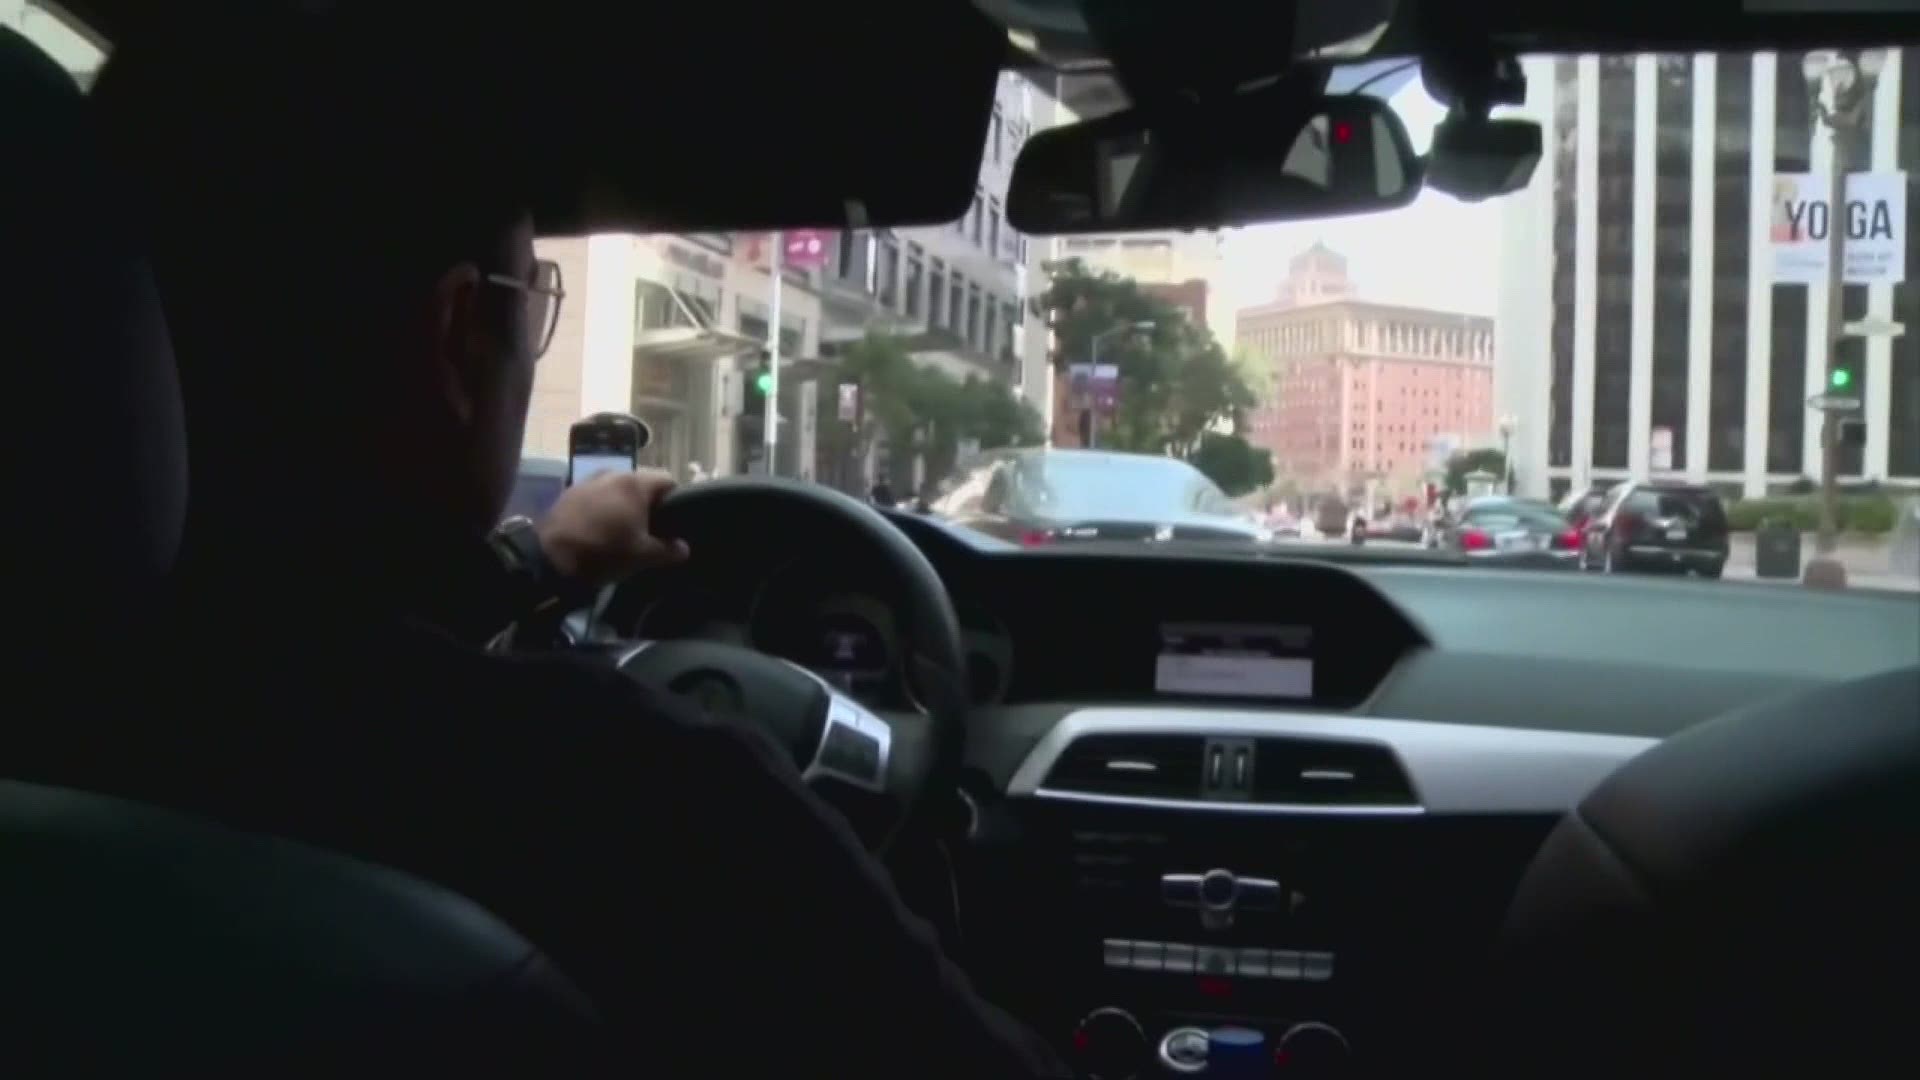 A new law went into effect Thursday specifically for Uber and Lyft drivers in Seattle.